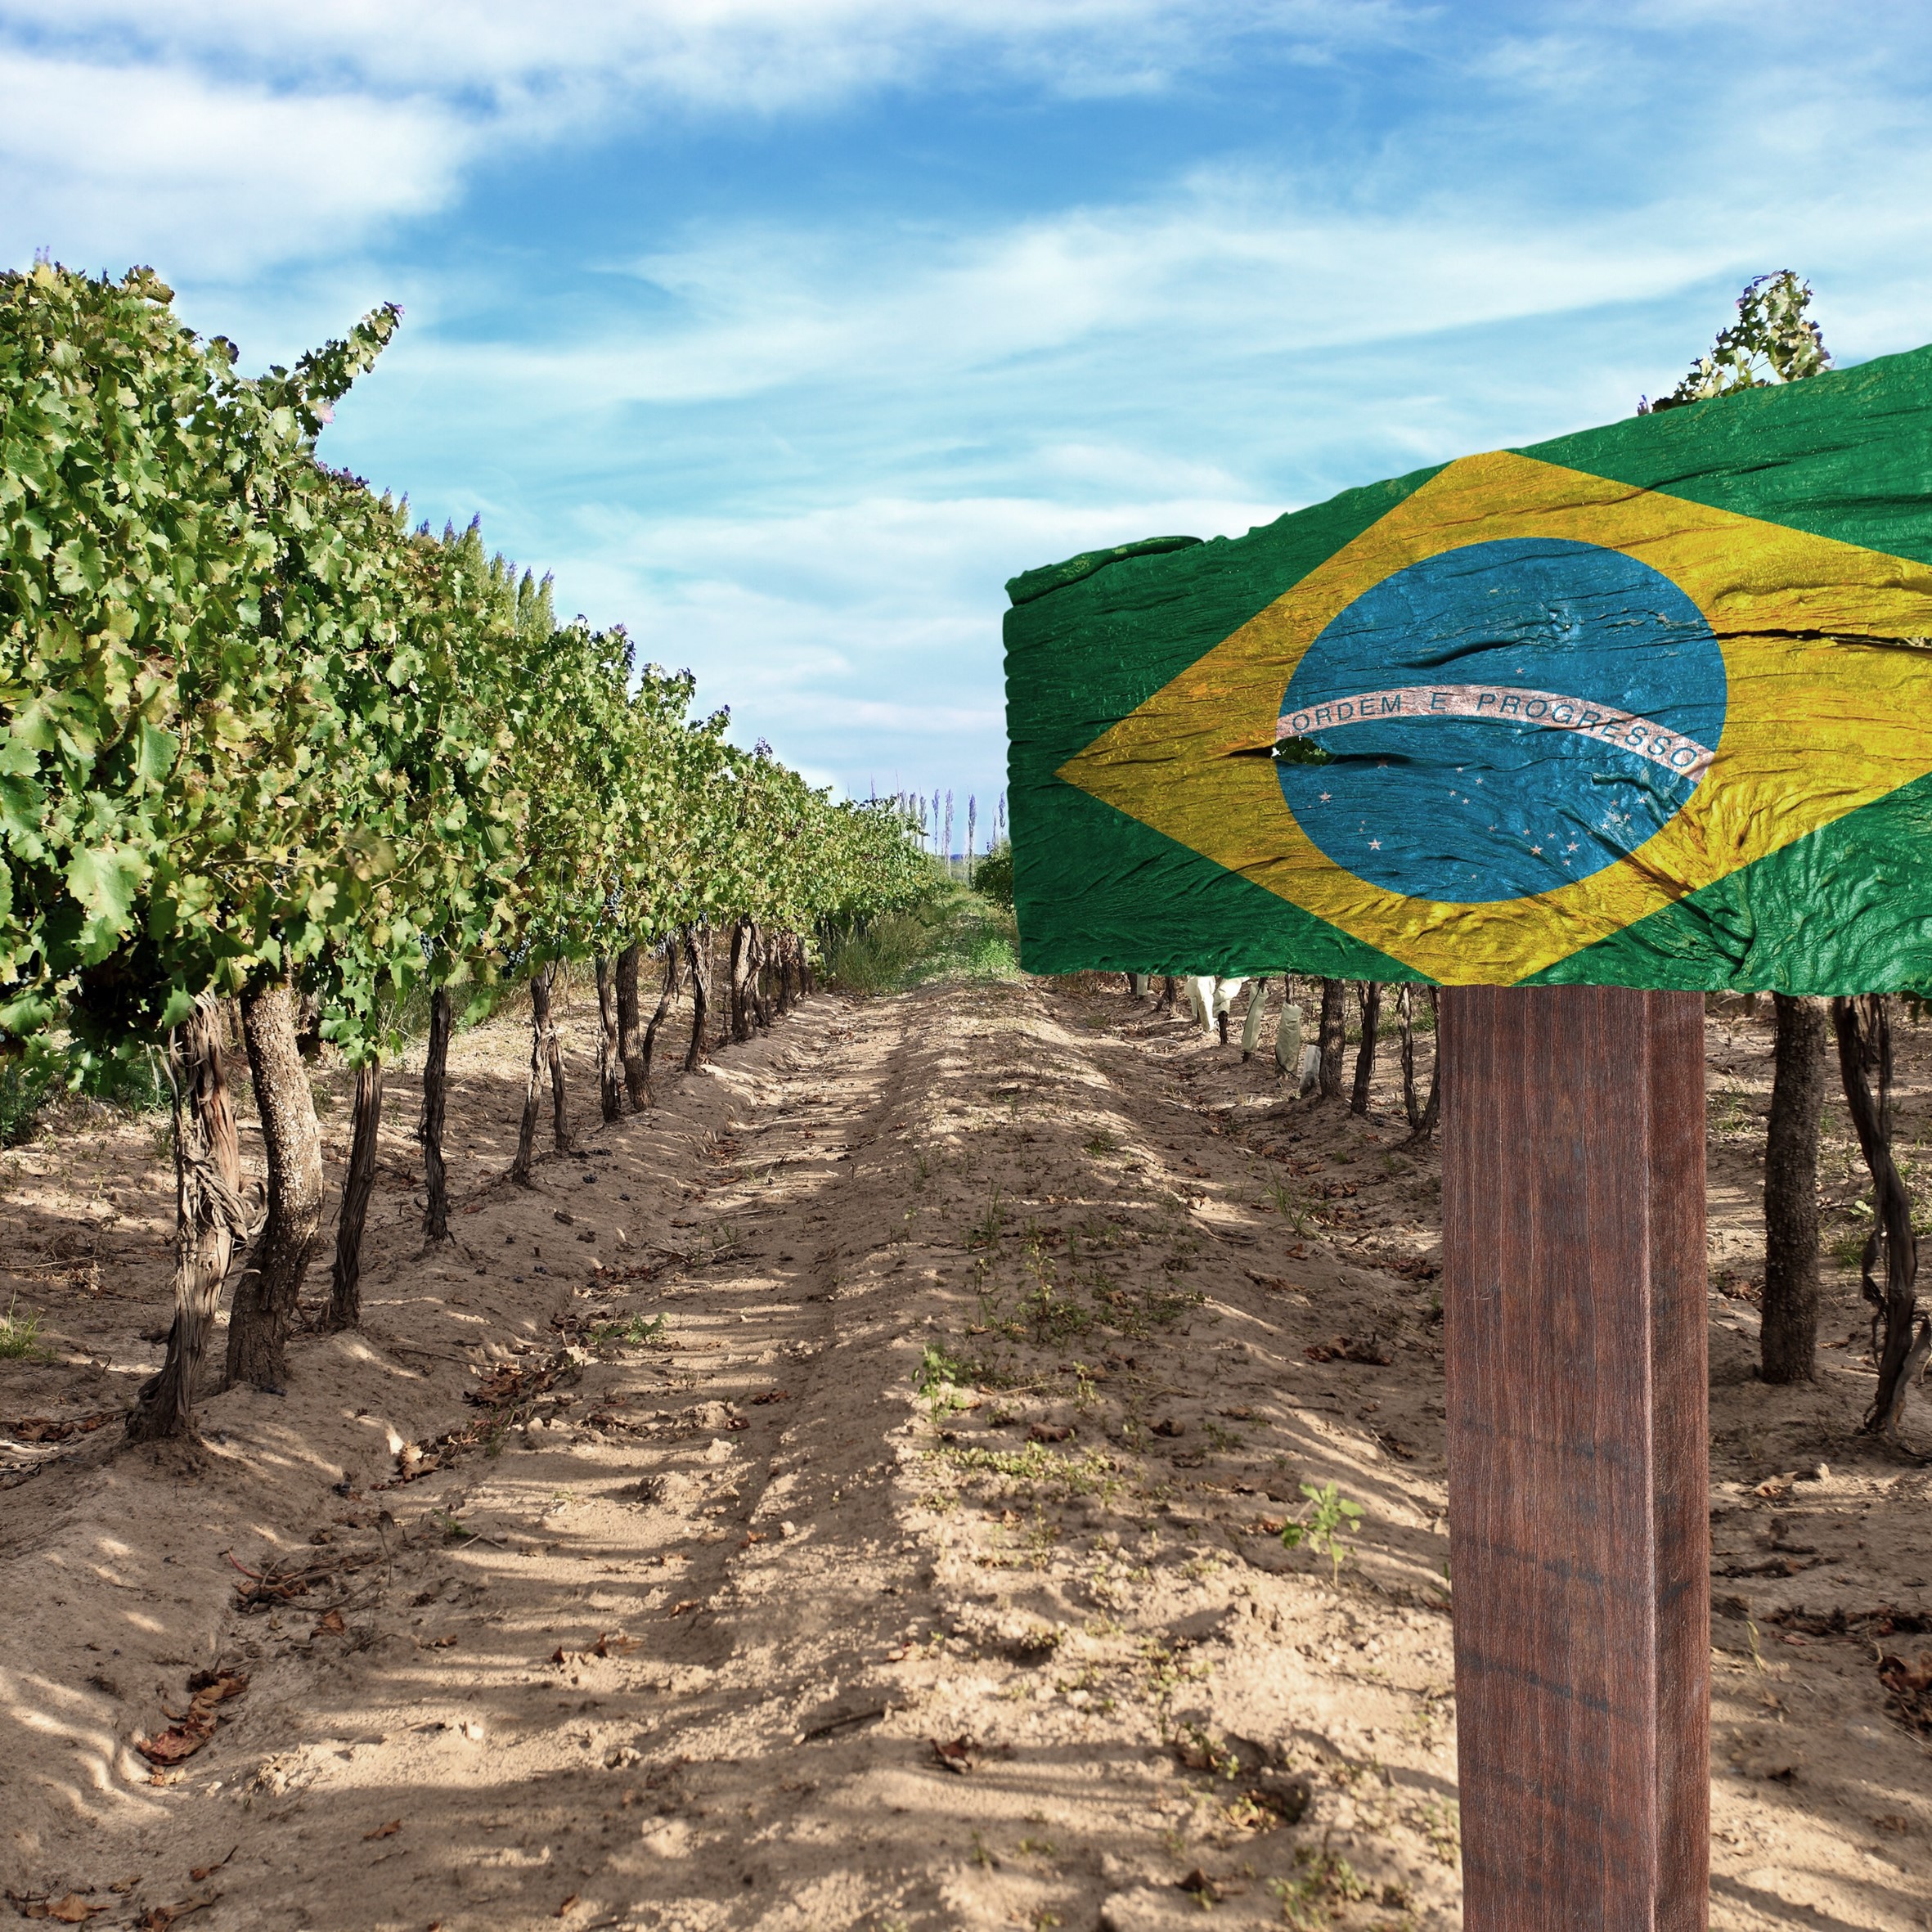 Brazil - India is ‘the new China for wine’ suggests research head - Harpers